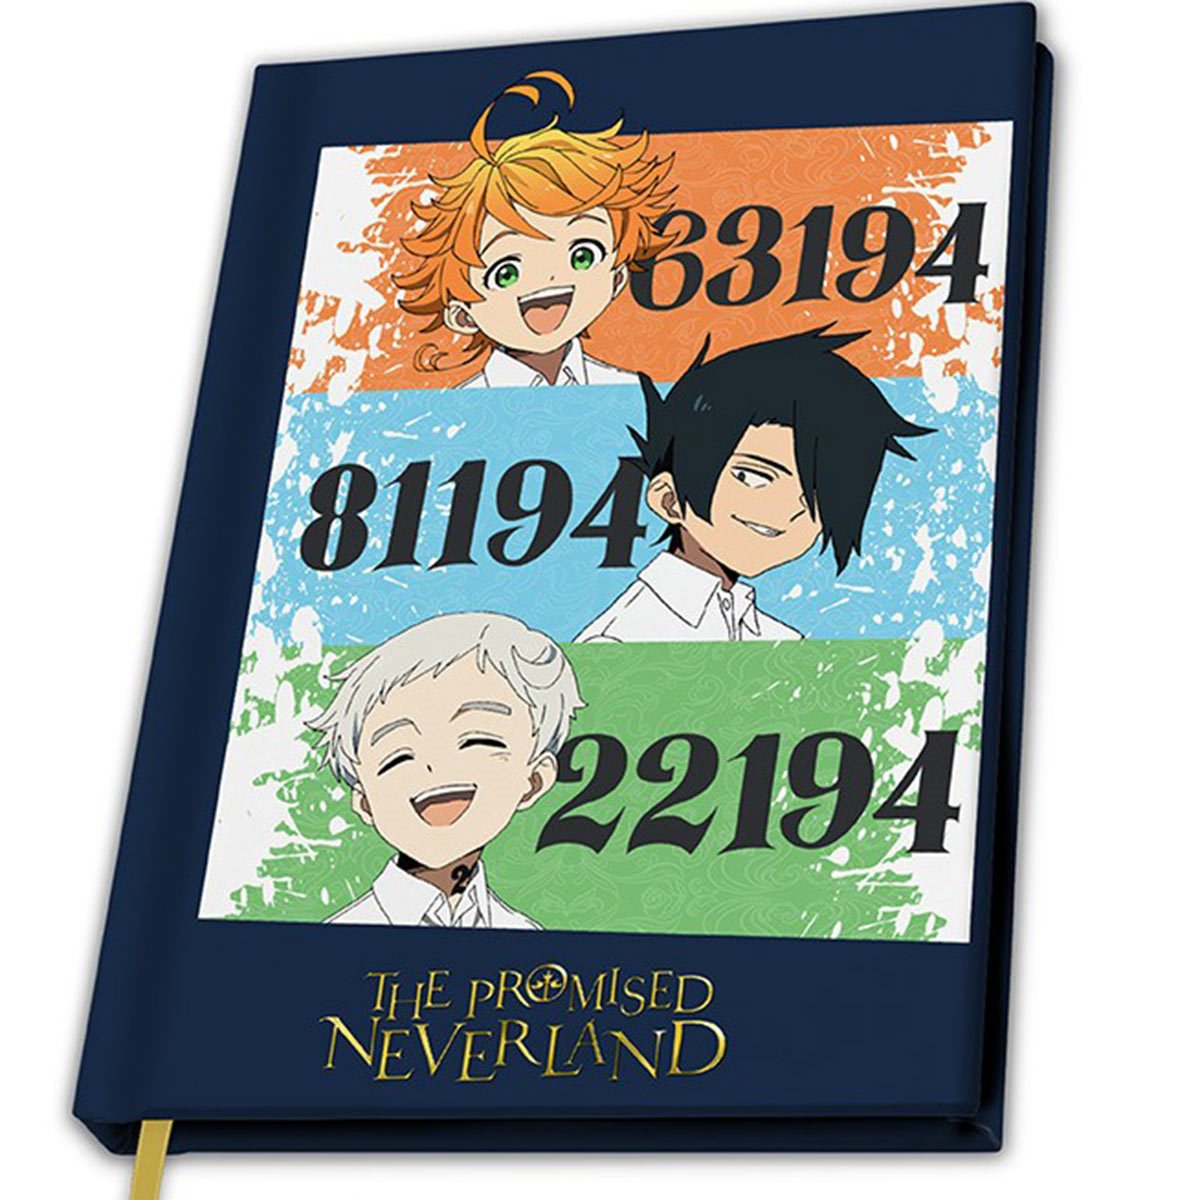 The Promised Neverland season 2's manga changes are a risk ready